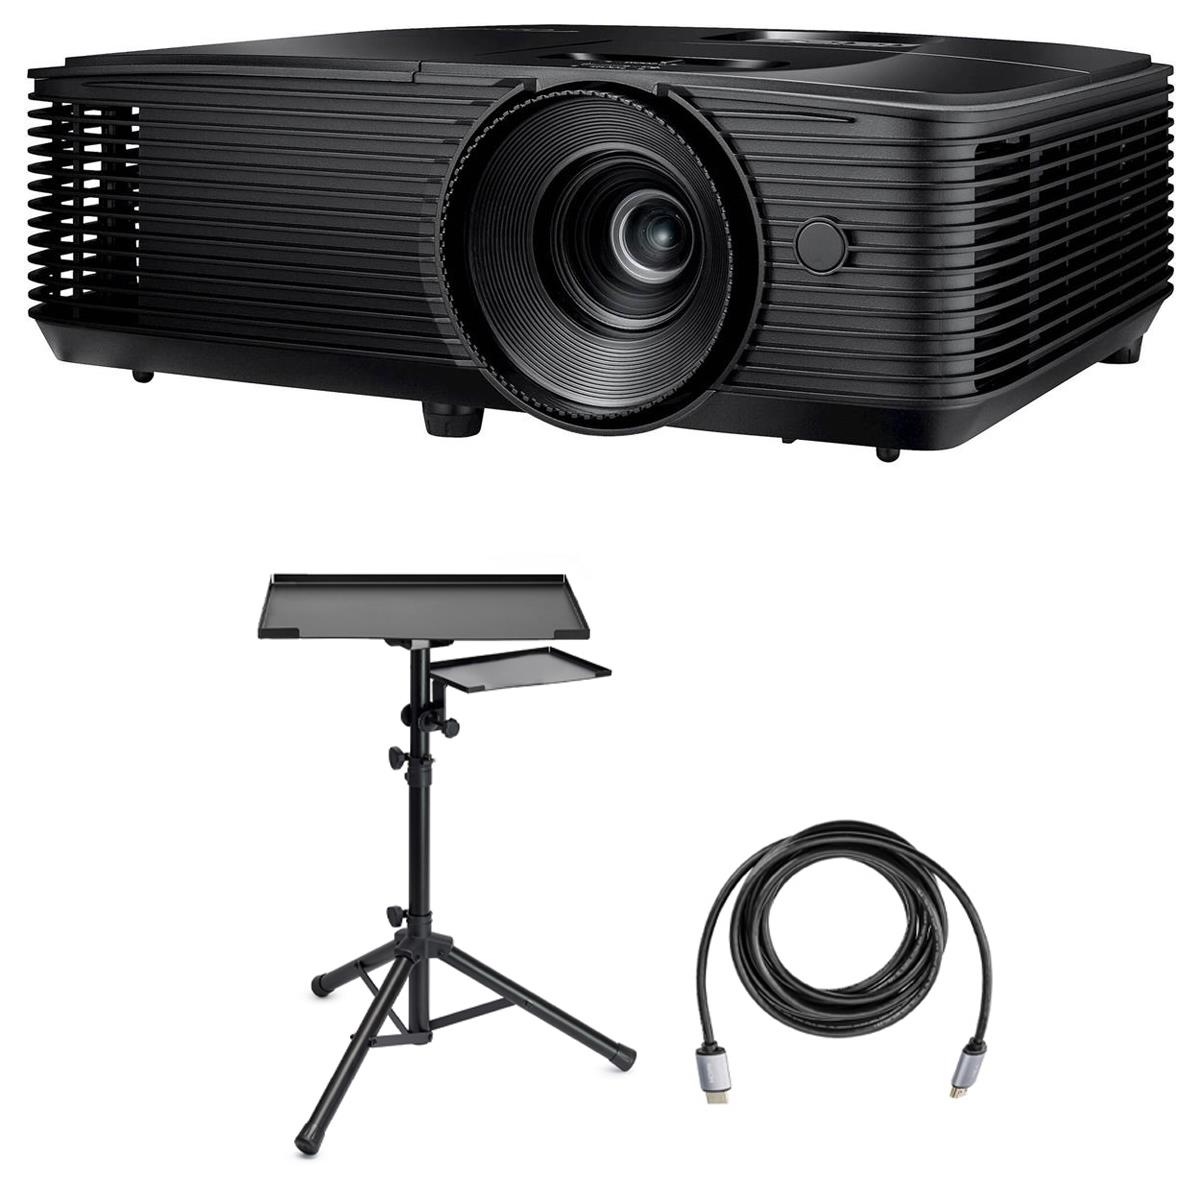 Optoma X400LVe Bright XGA Full 3D DLP Projector, 4000 Lumens with Stand, Cable -  X400LVE AK